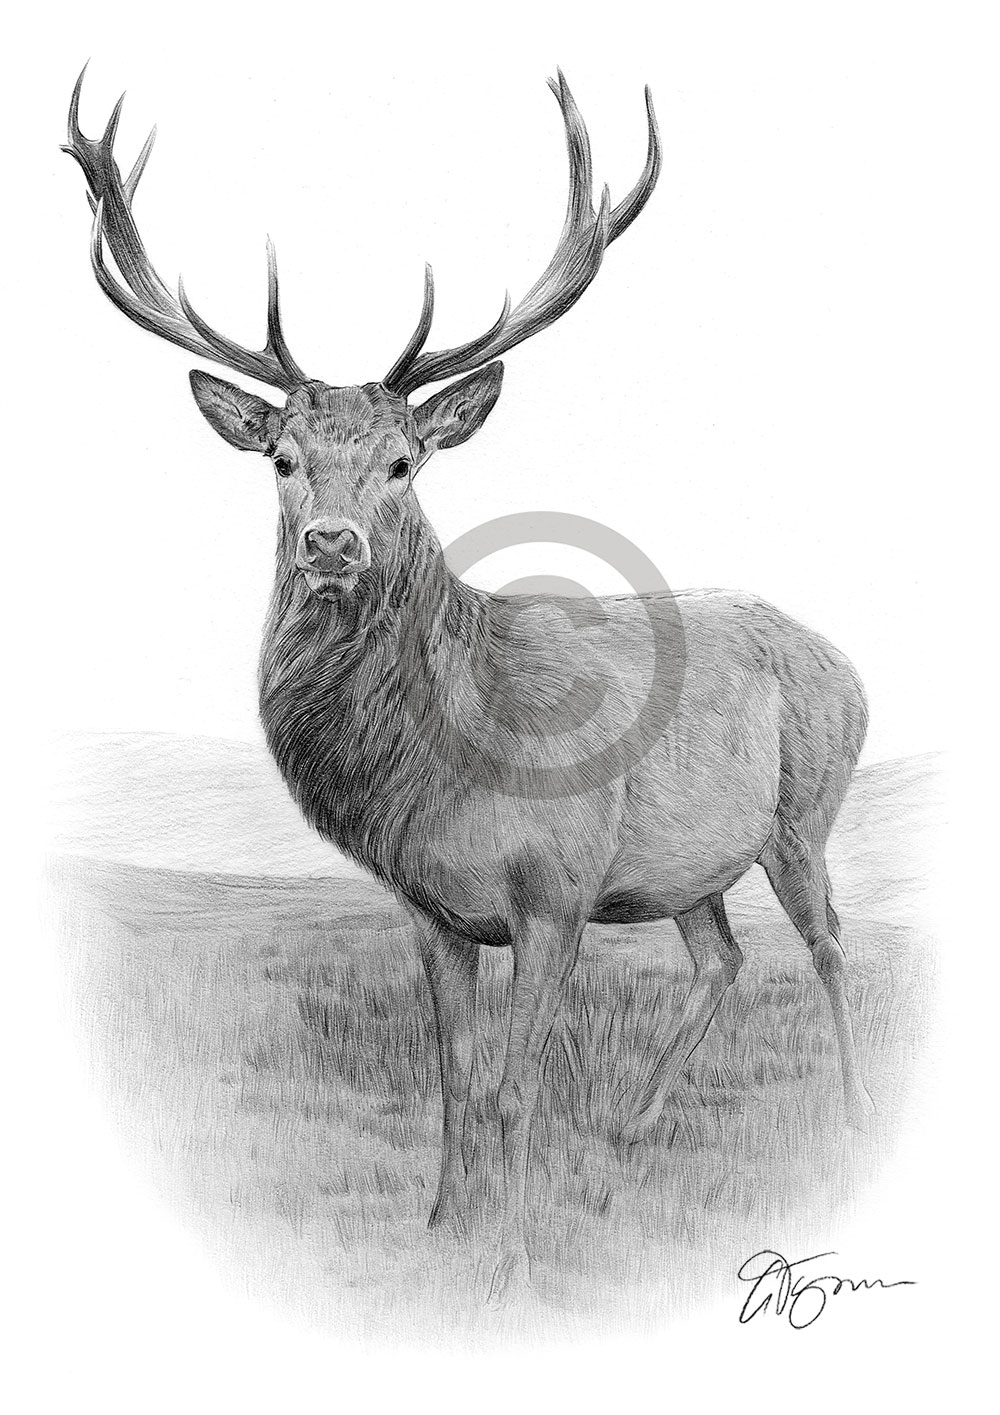 Pencil drawing of a stag by UK artist Gary Tymon